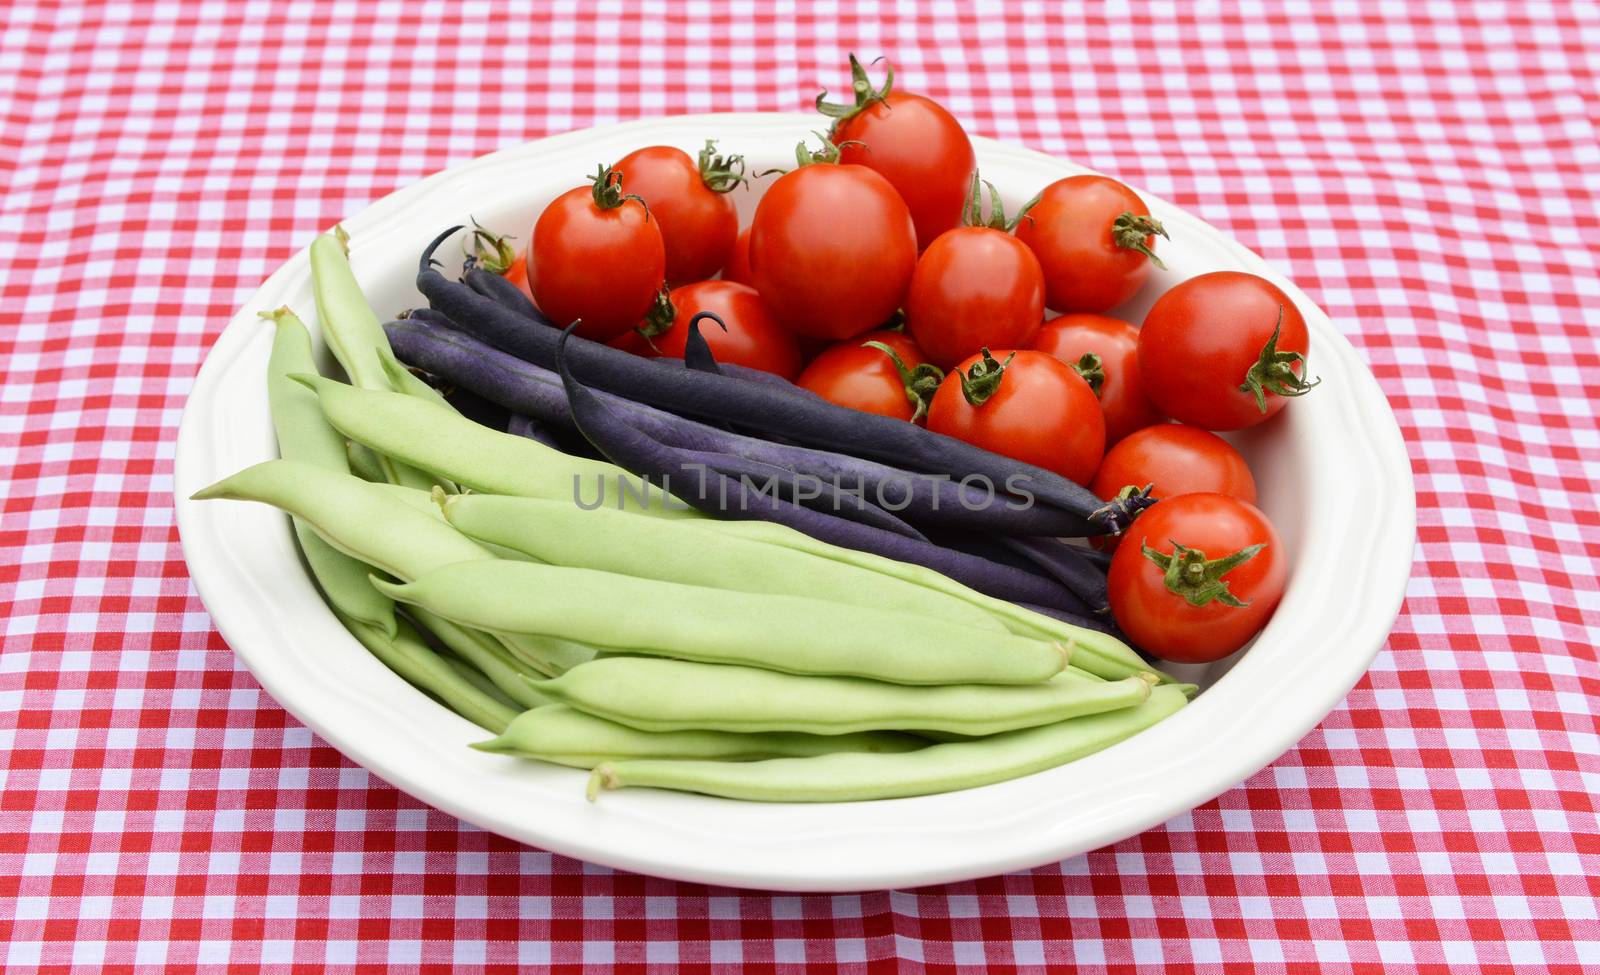 Green yin yang beans, purple French beans and juicy red cherry tomatoes in a round white dish on a red gingham tablecloth